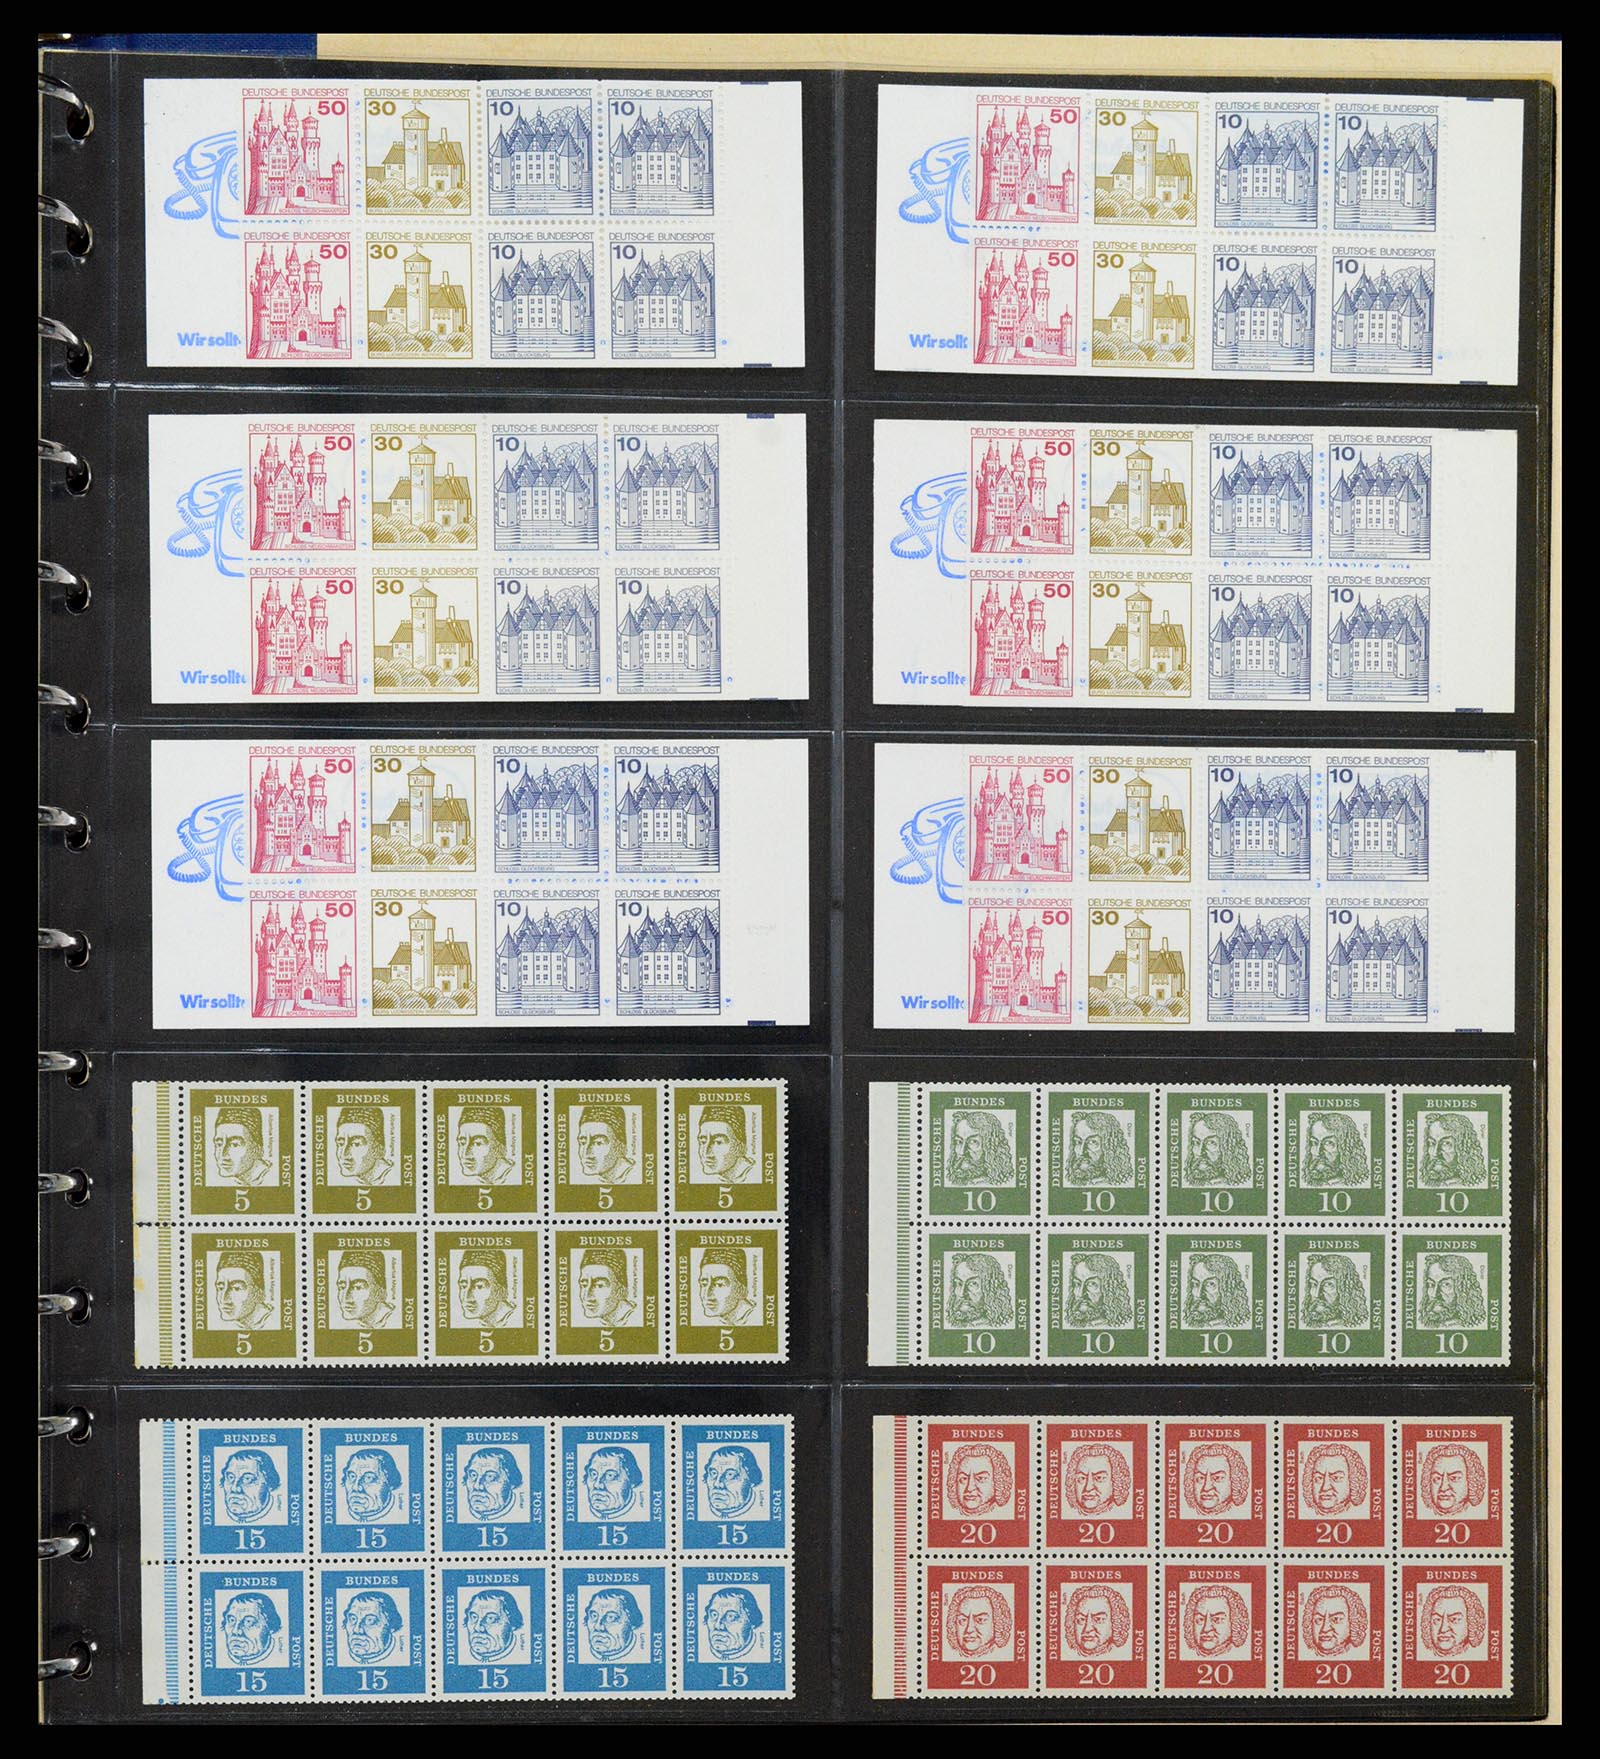 37365 026 - Stamp collection 37365 Bundespost stamp booklets 1951-2001.